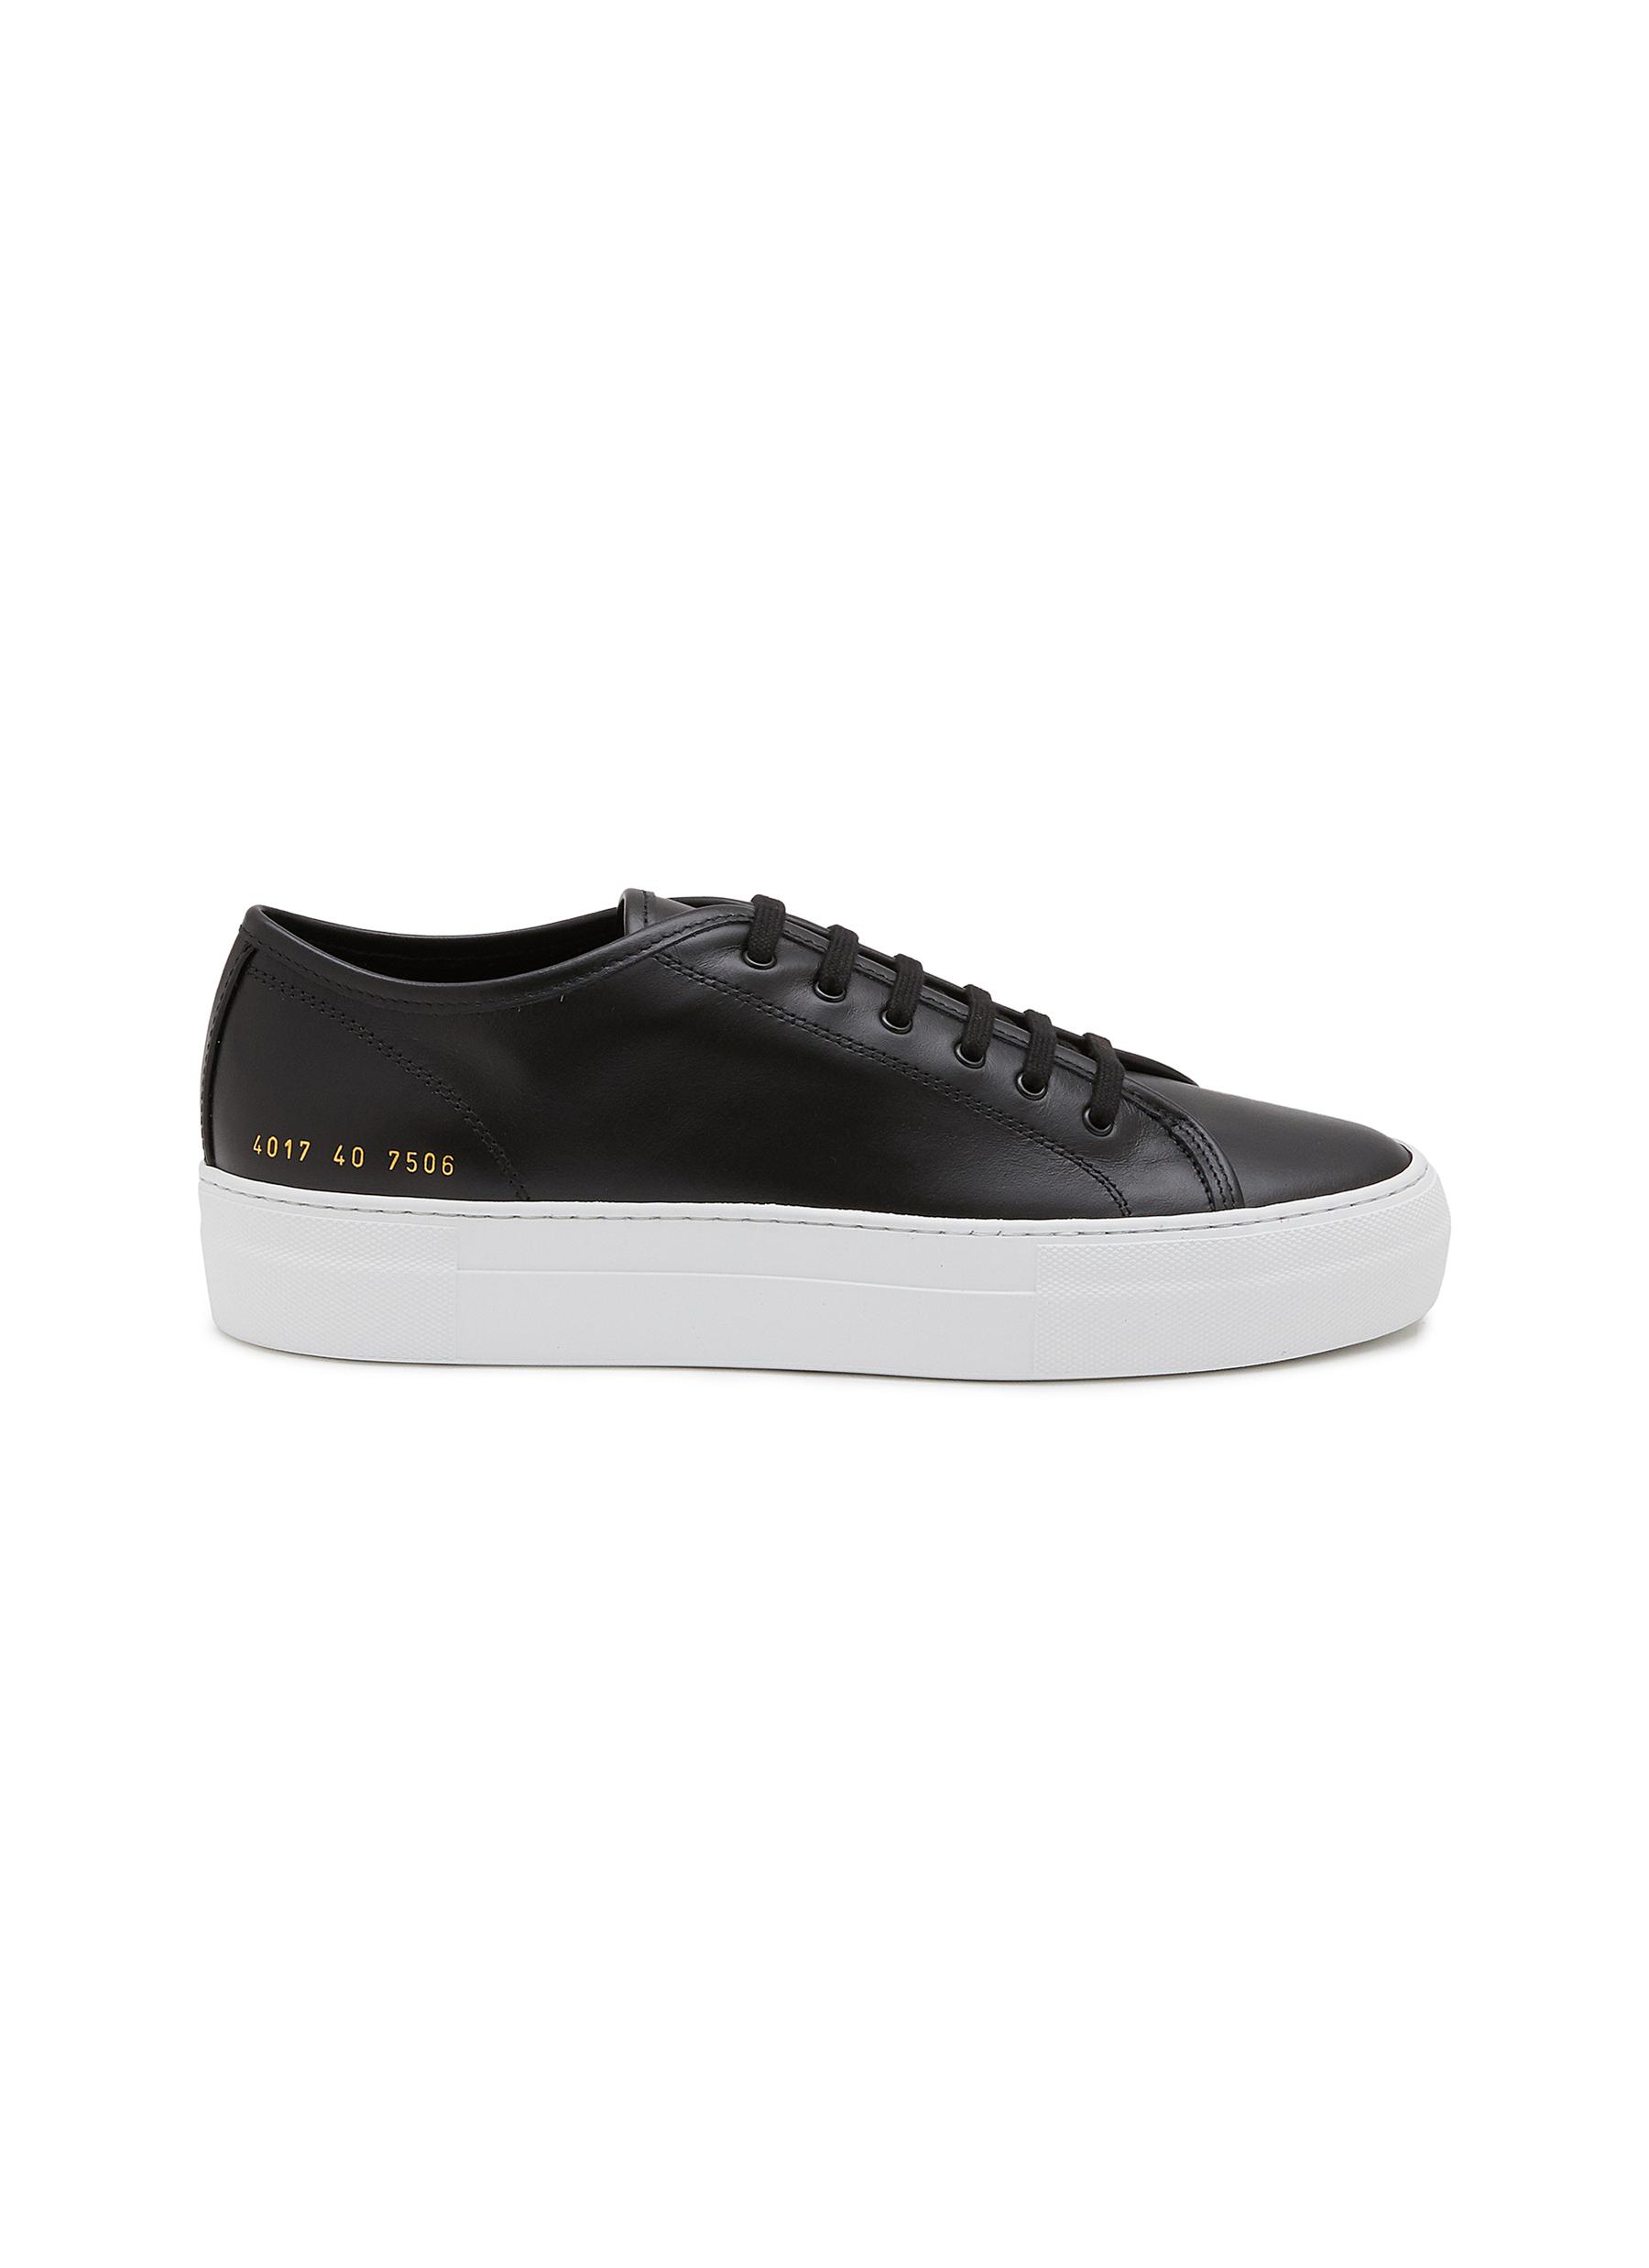 ‘Tournament' Low Top Leather Platform Sneakers